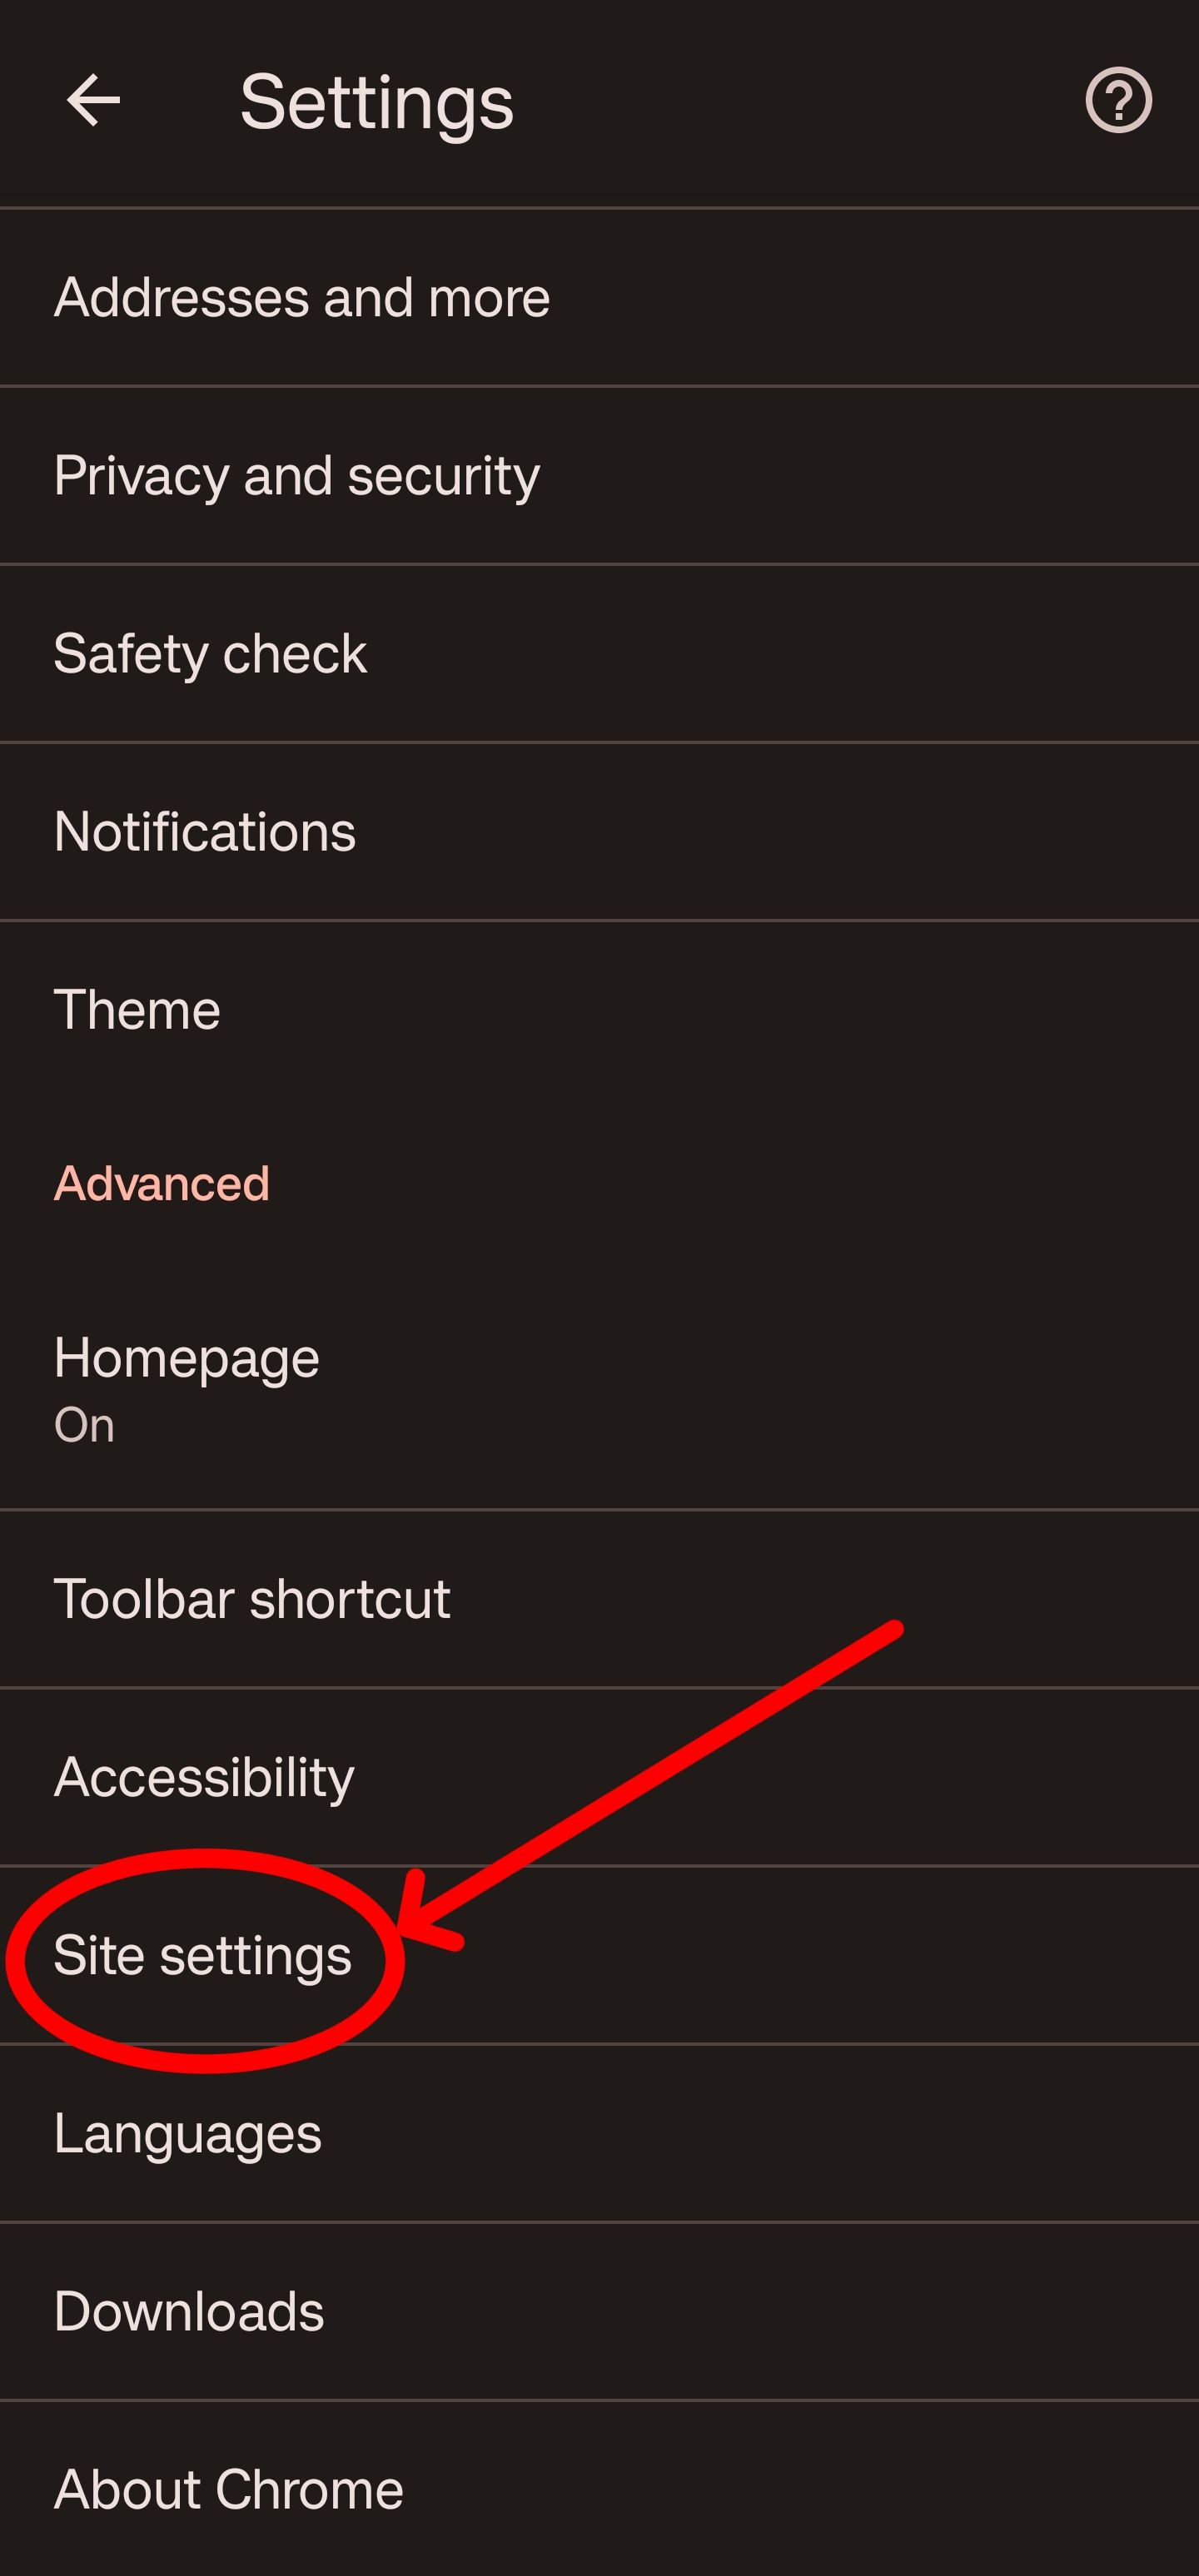 Click on site settings to access your location settings.